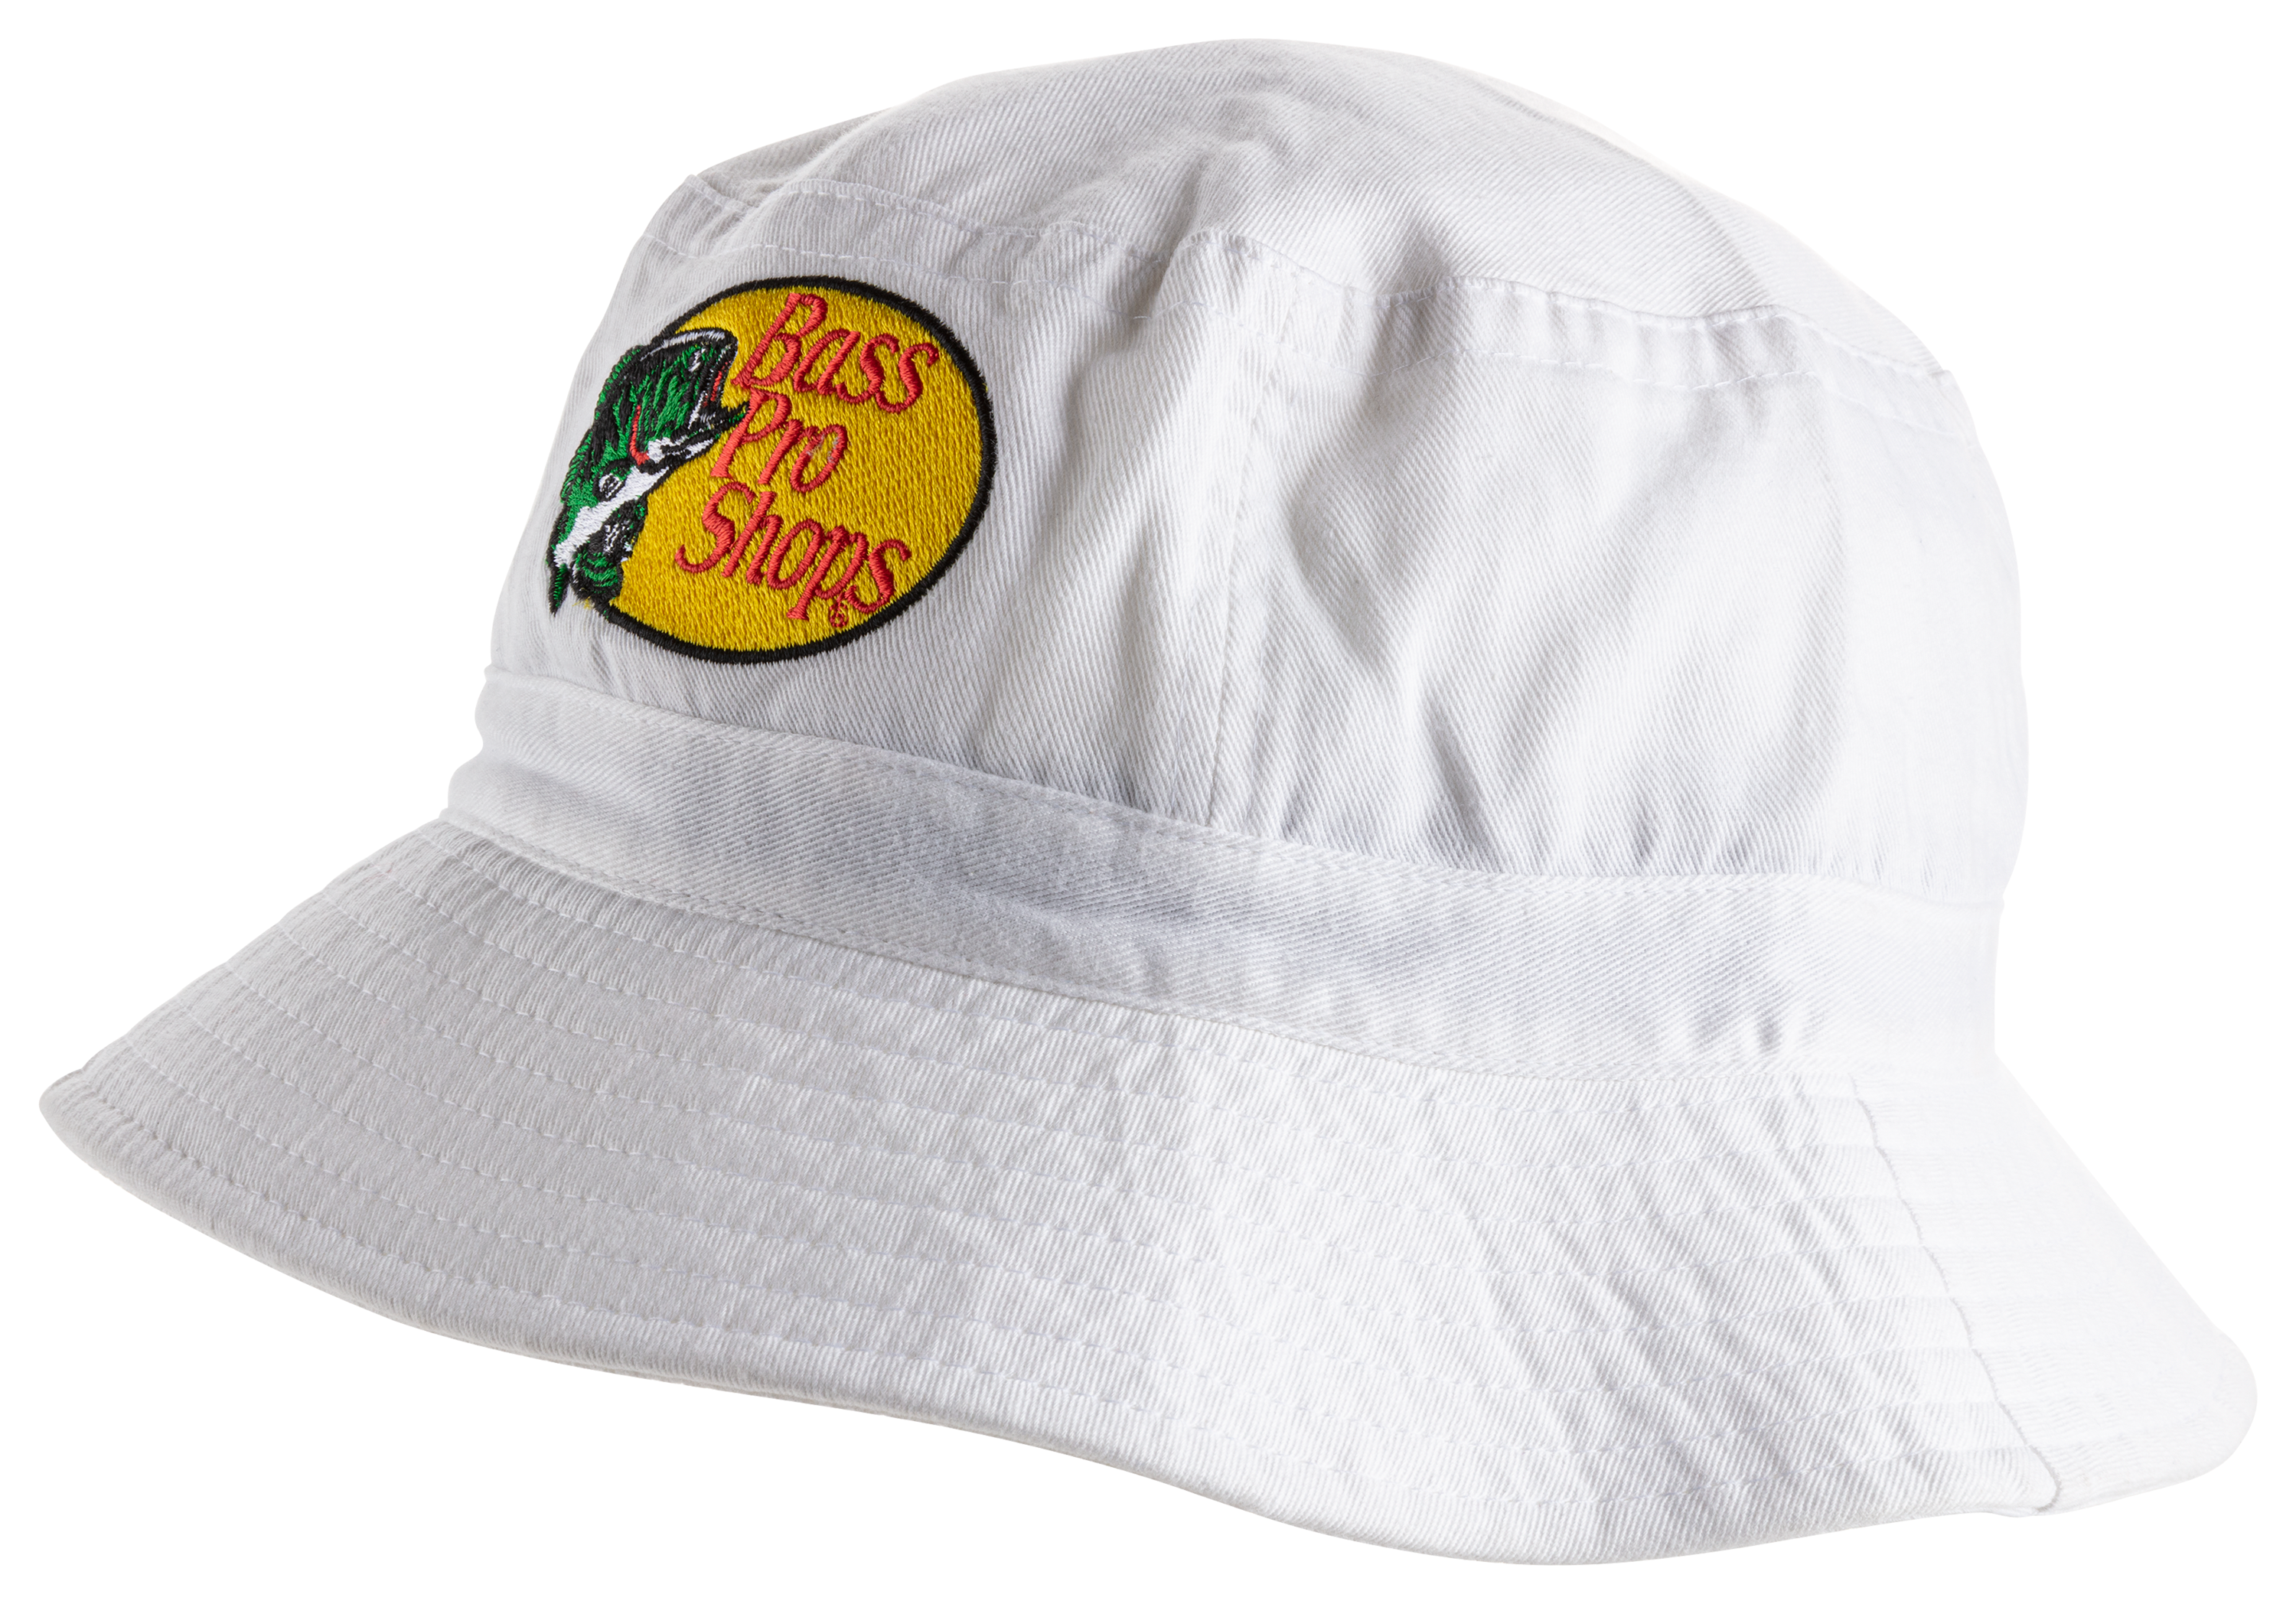 Bass pro shops hats all colors available  Bass pro shop hat, Bass pro  shop, Bass pro shops